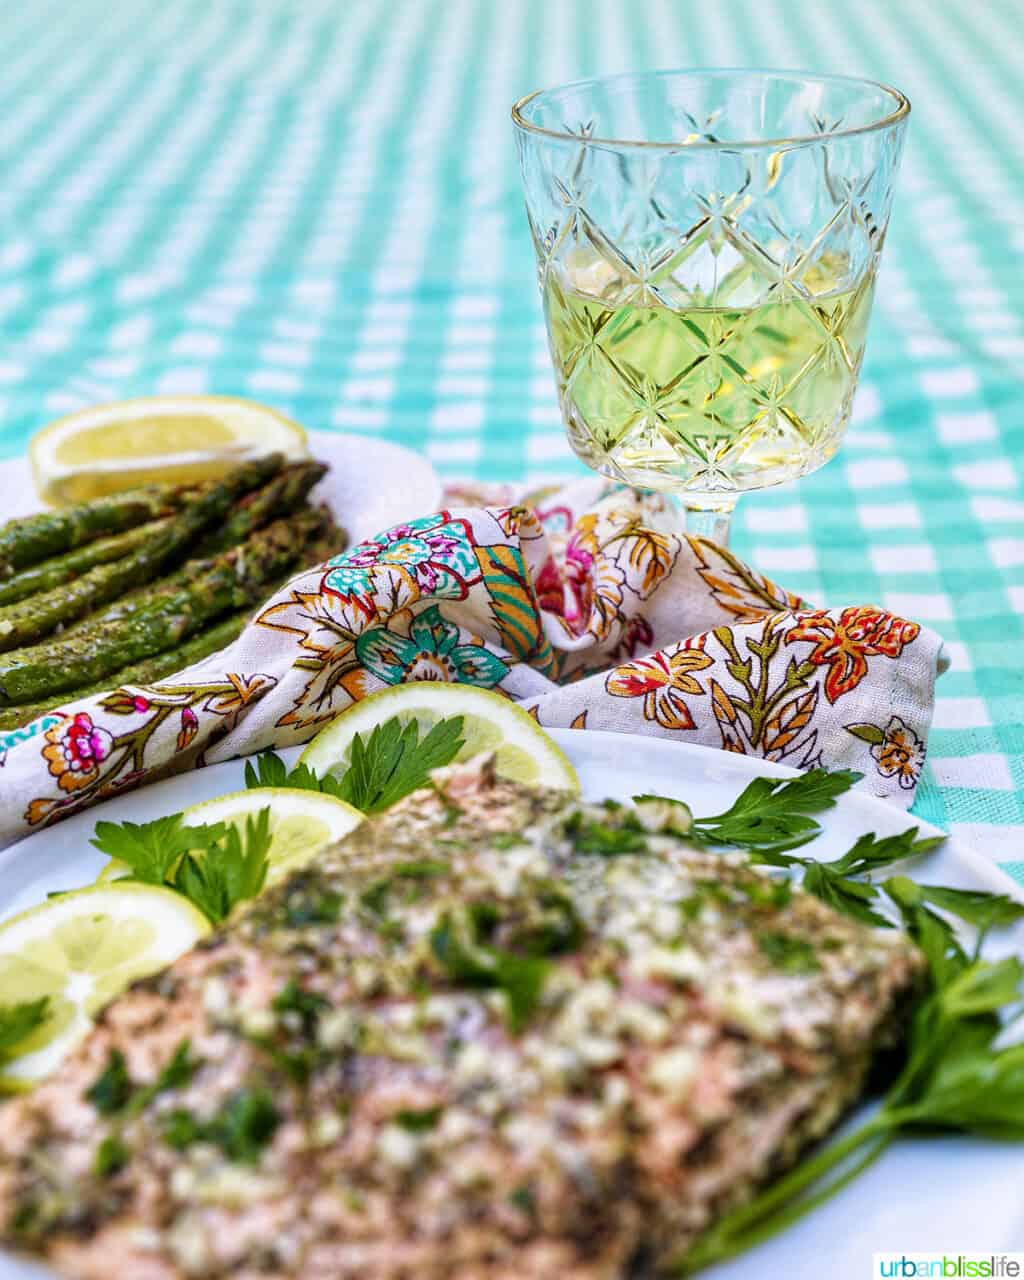 glass of white wine with salmon and asparagus on an aqua checkered tablecloth.